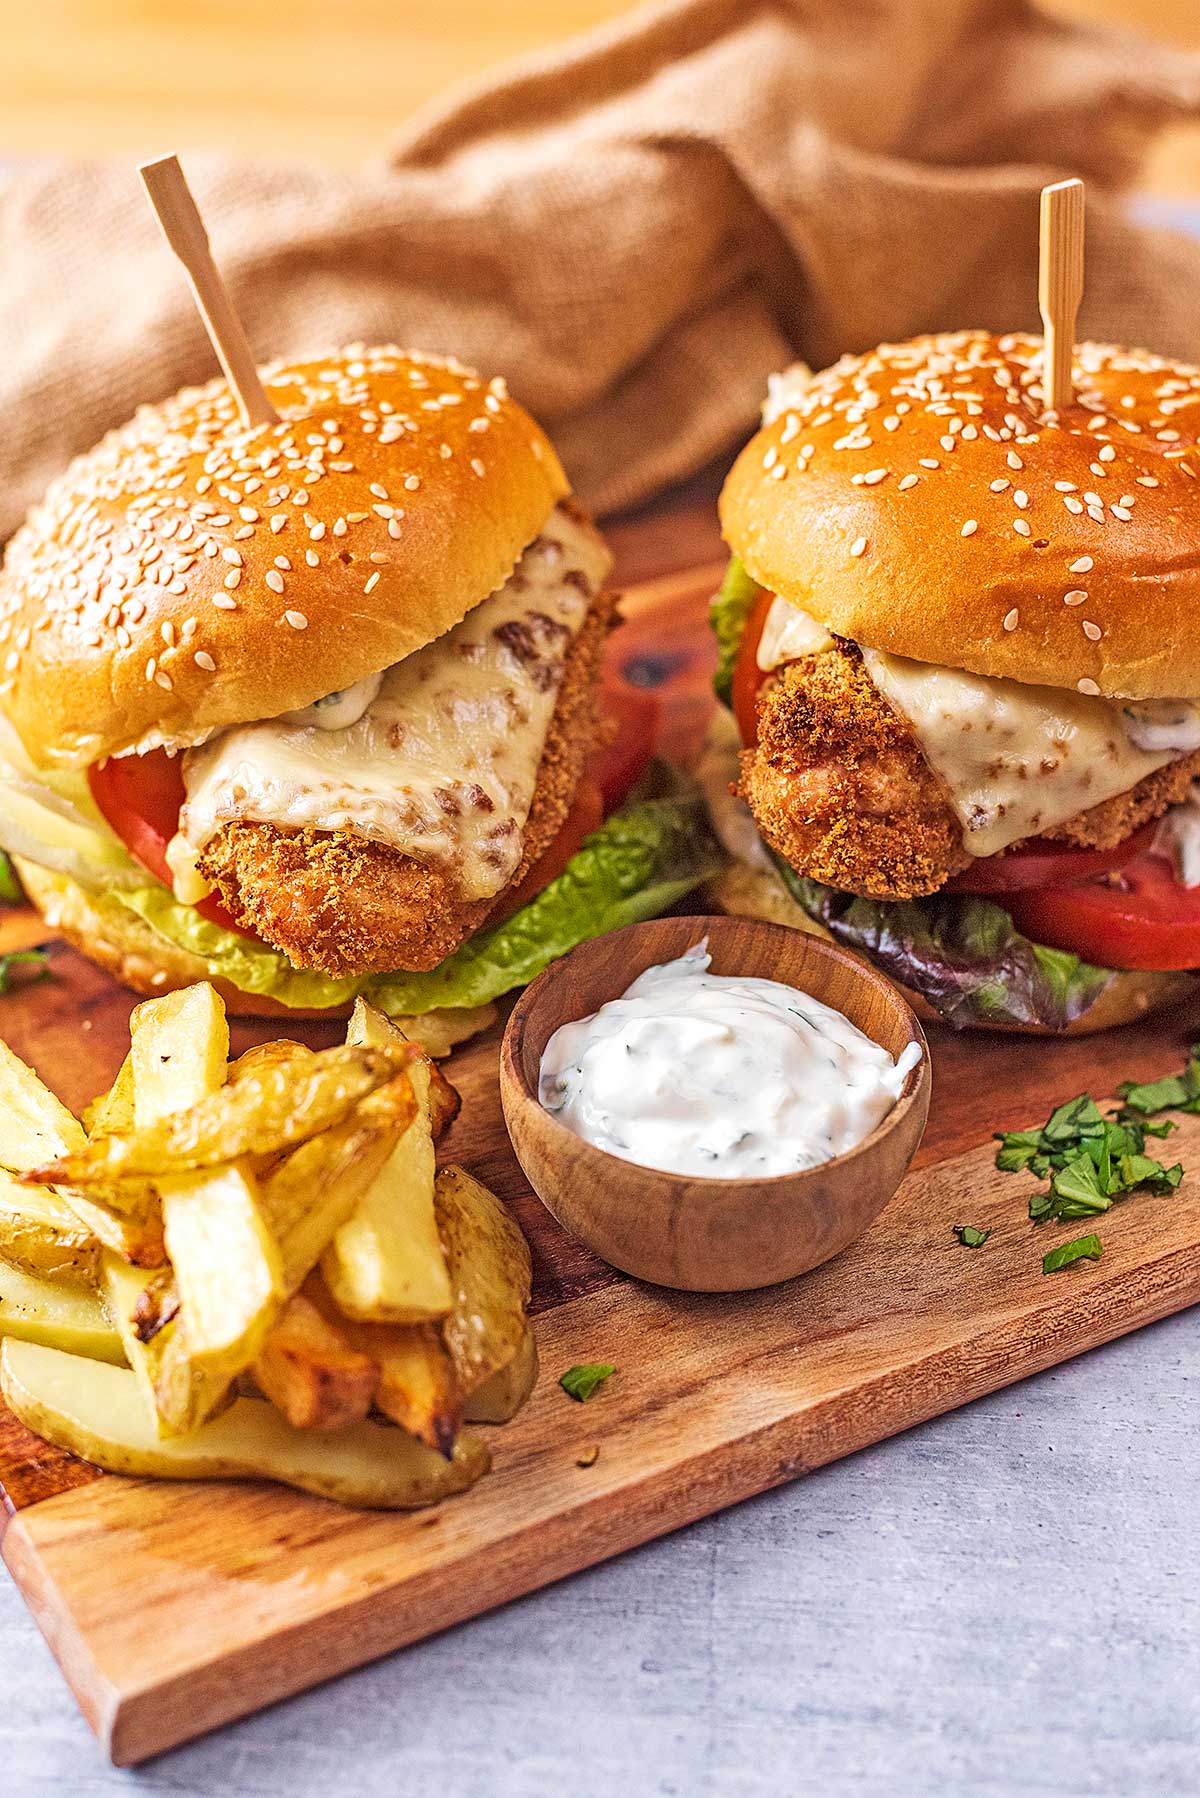 Two chicken burgers with fries and dip on a wooden serving board.